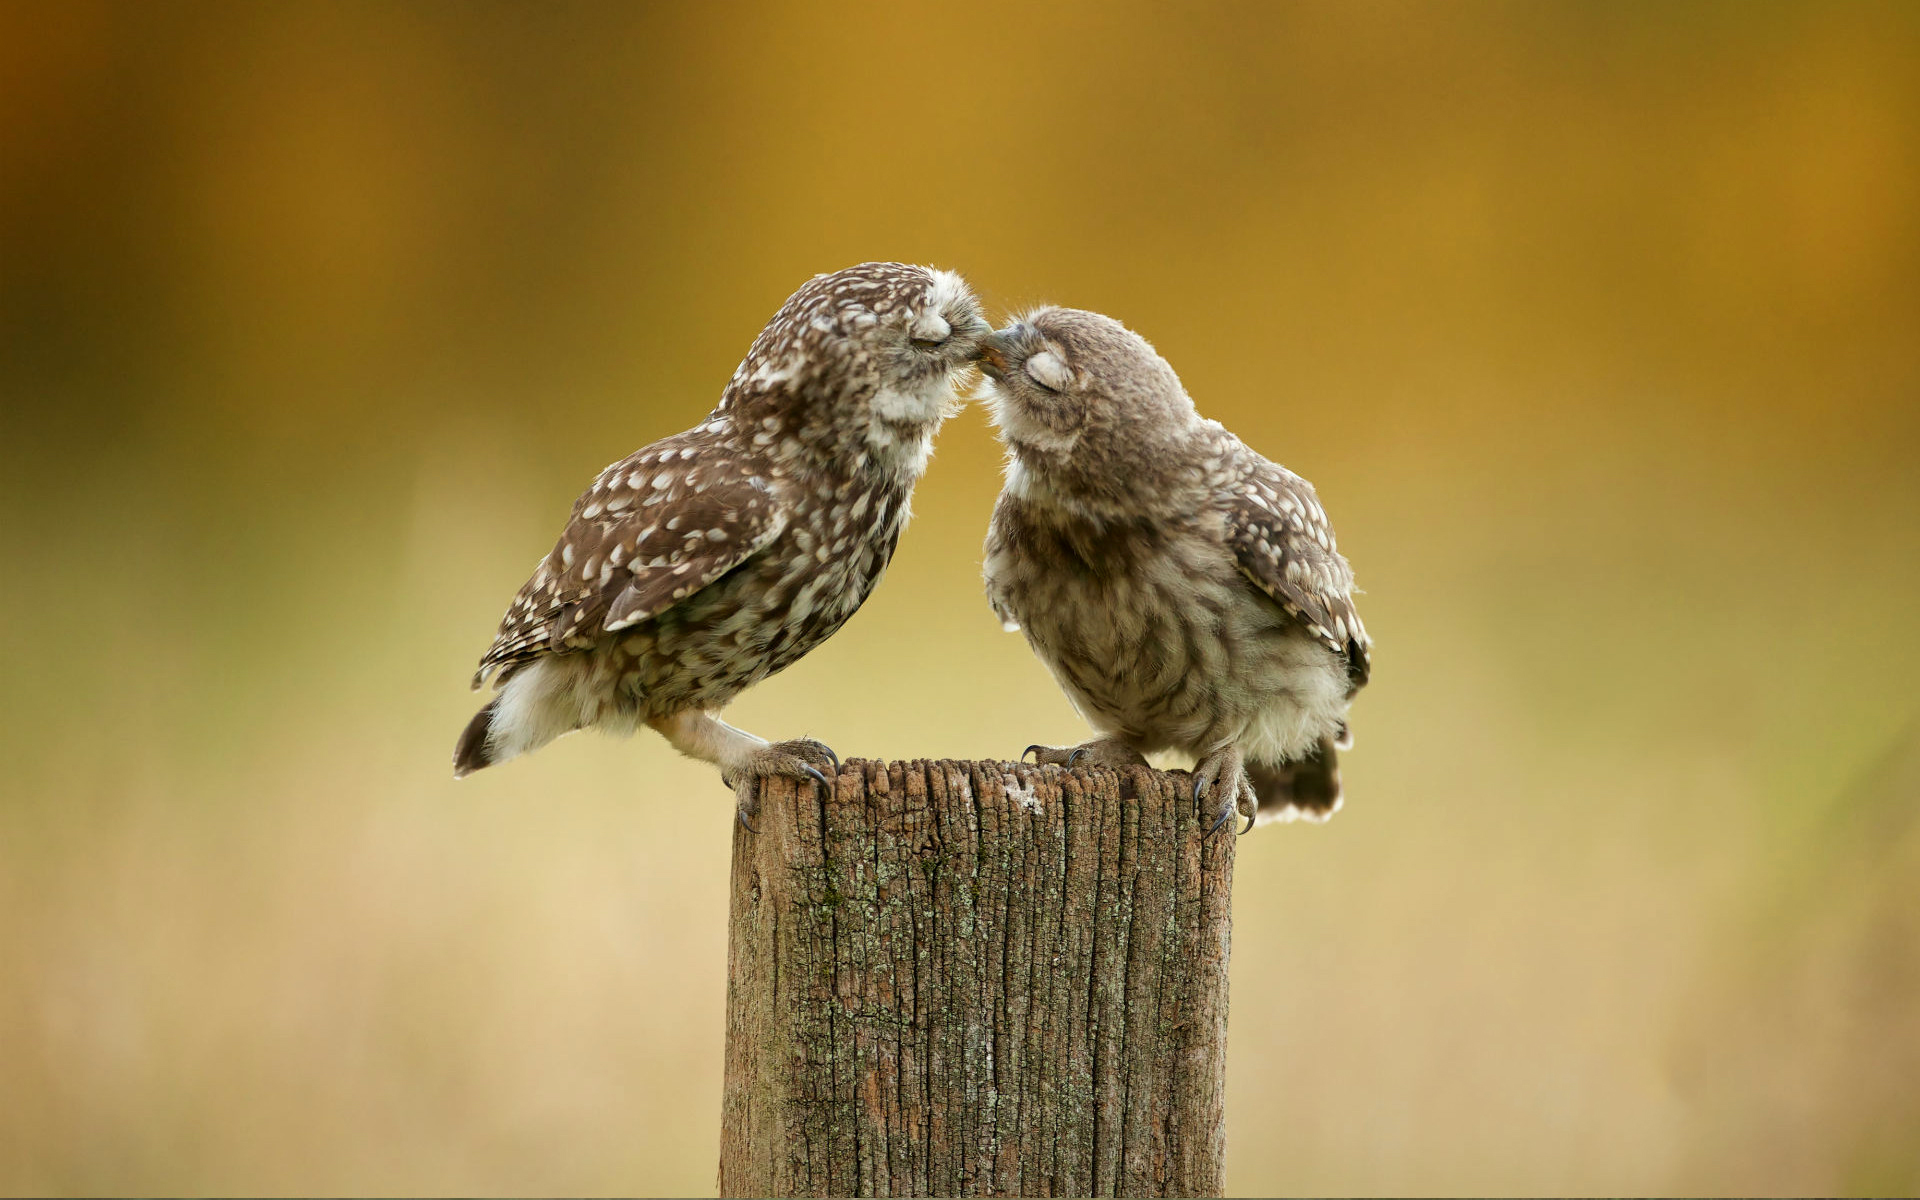 Two owls in love